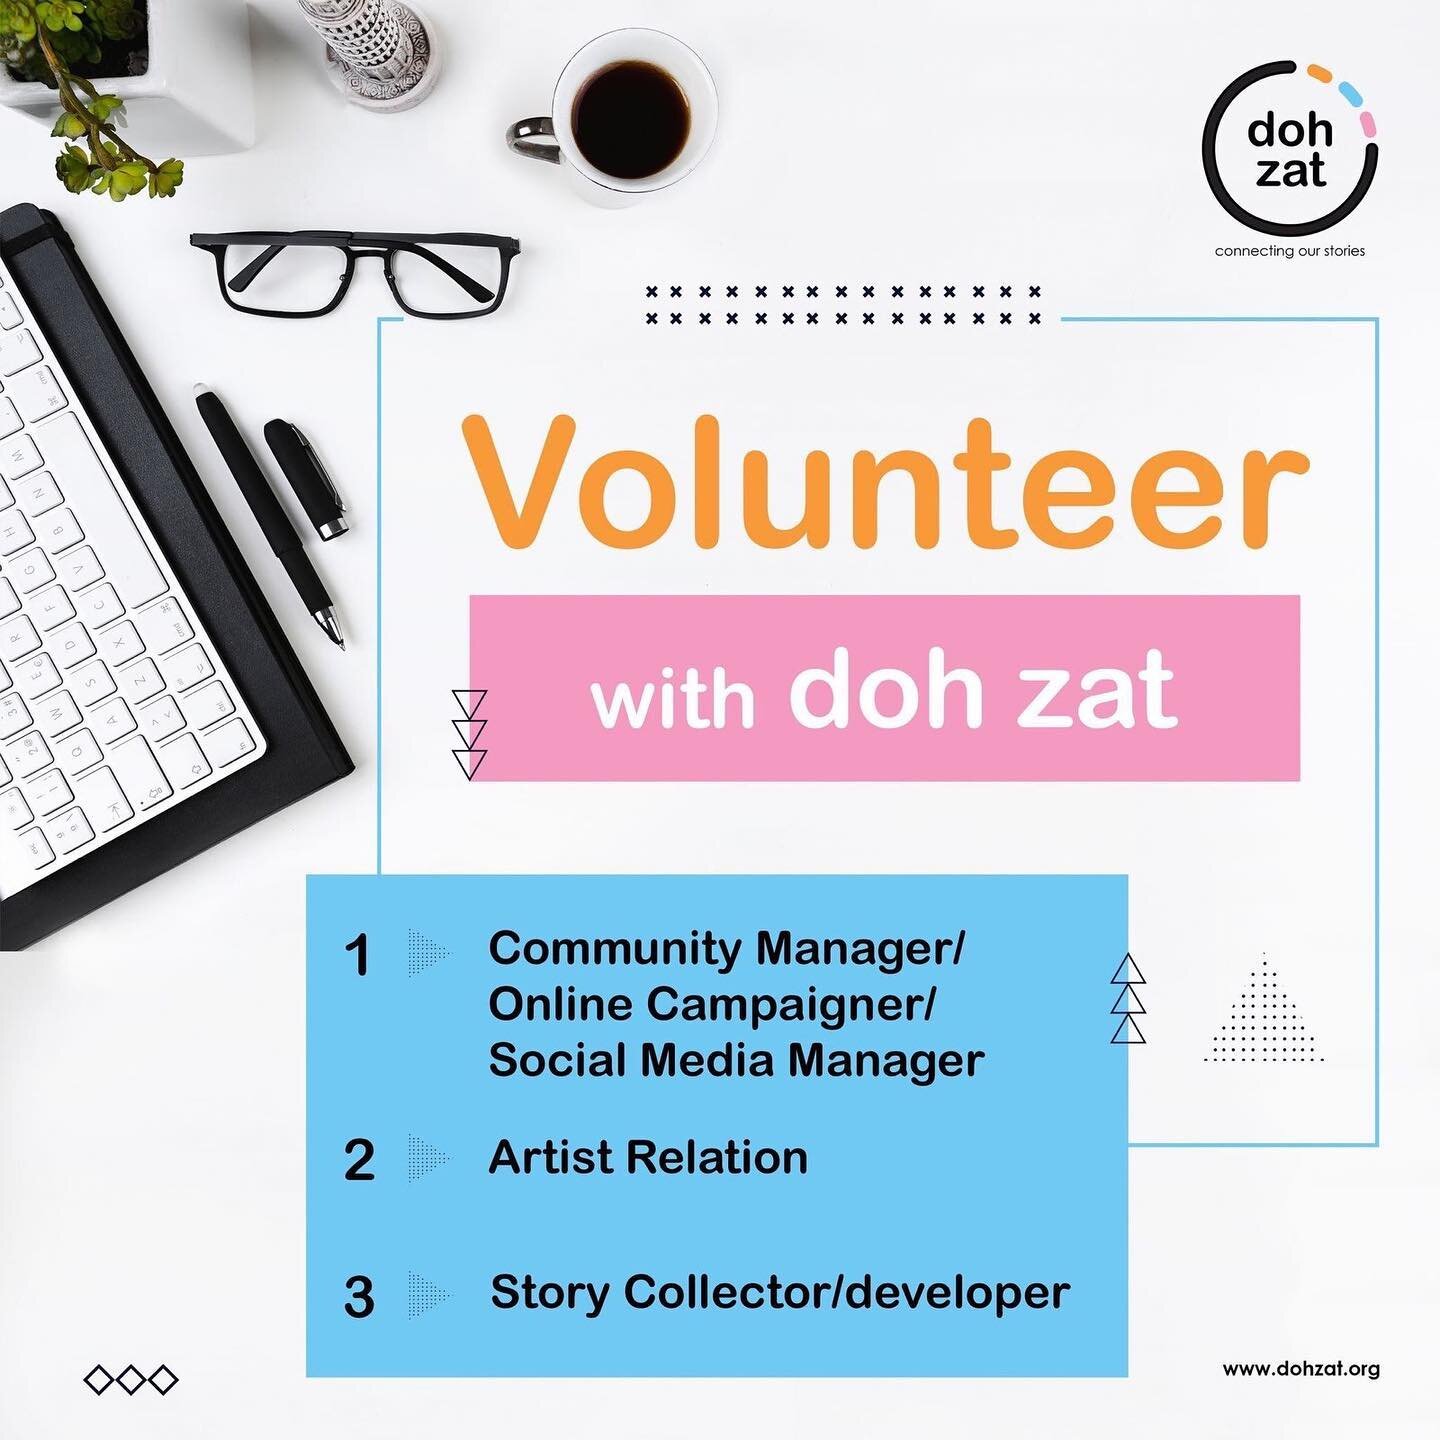 Are you interested in Social Issues? Do you want to make a change to help our world better? 

Doh Zat, a platform where we speak out loud about the experience of social issues is now calling for volunteers.

See details in the photos and apply if you